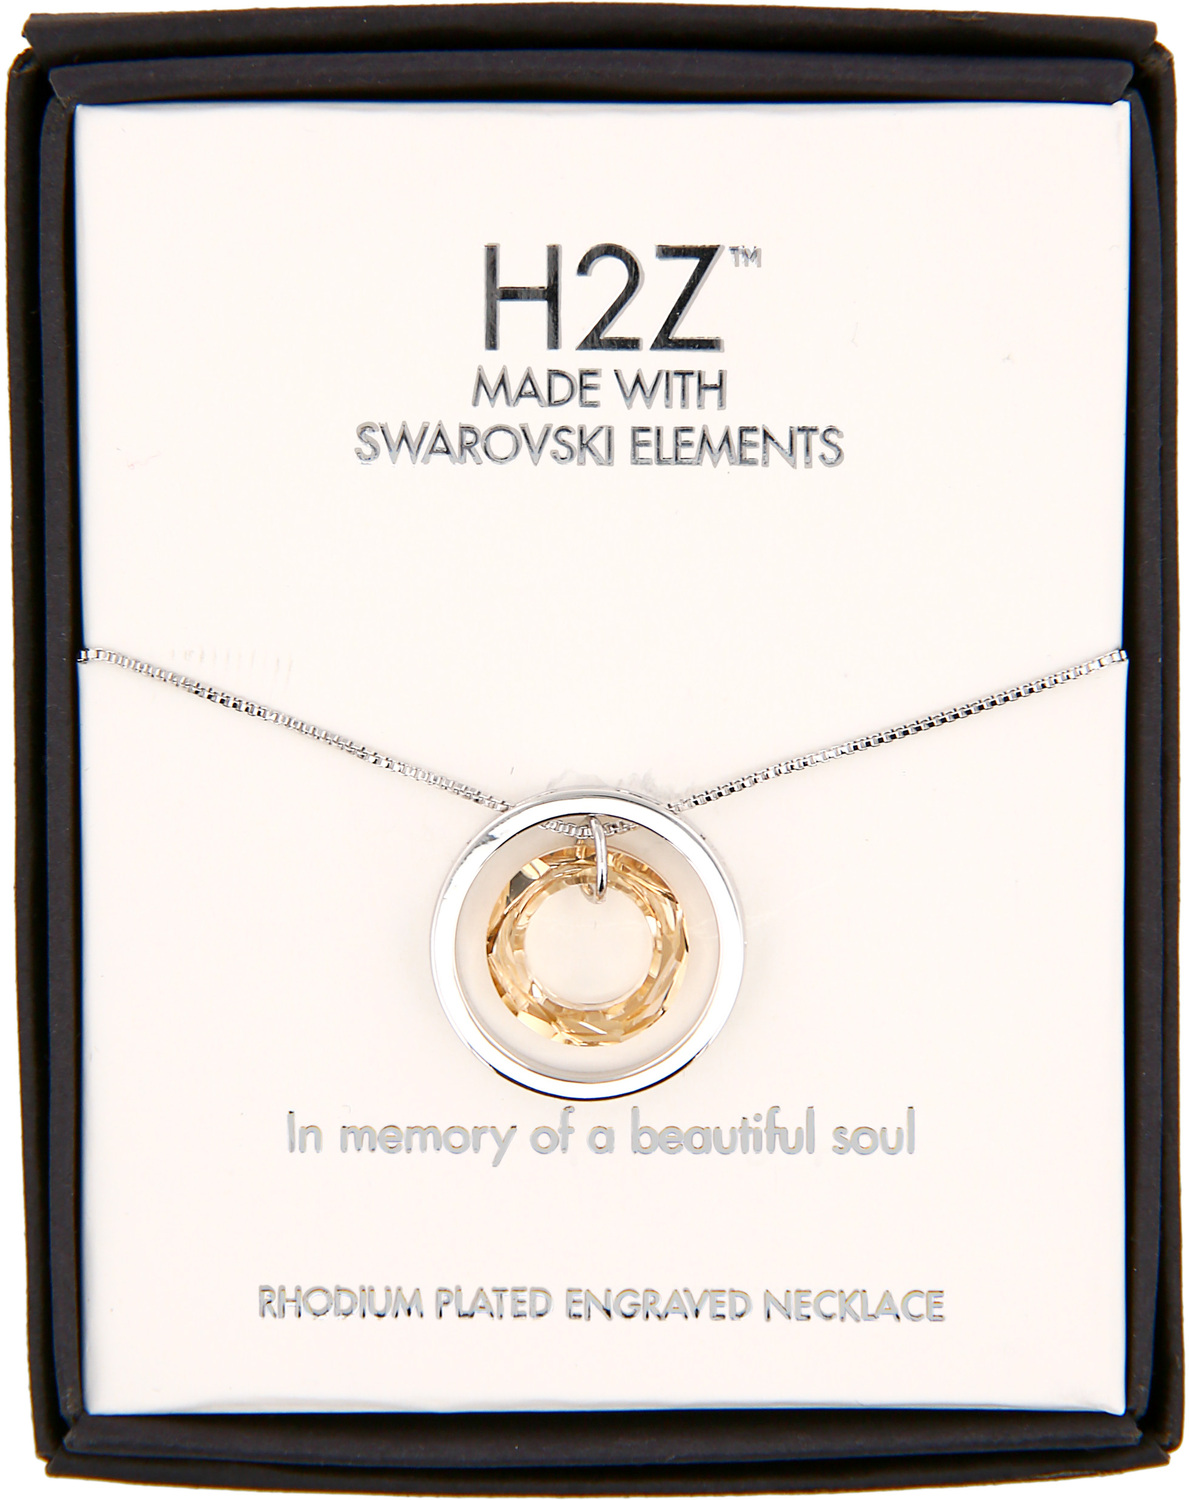 In Memory
Golden Shadow Crystal by H2Z Made with Swarovski Elements - In Memory
Golden Shadow Crystal - 17"-19" Engraved Rhodium Plated Austrian Element Necklace